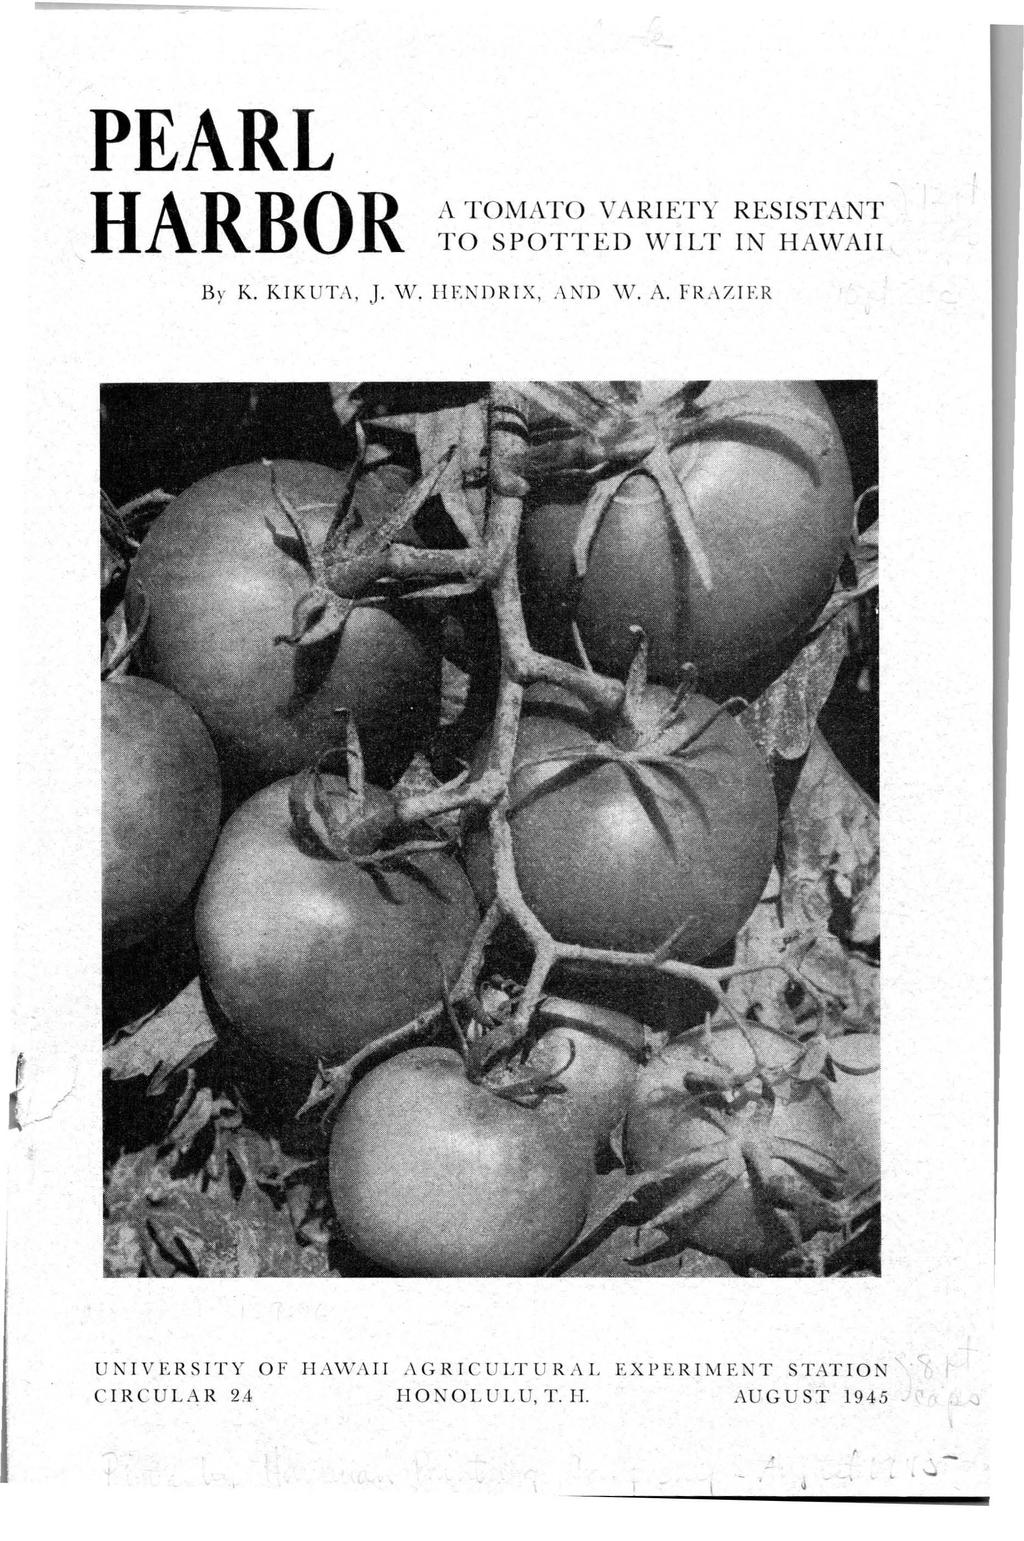 PEARL HARBOR A TOMATO VARIETY RES ISTANT TO SPOTTED WILT IN HA\\TAII B y K. KIK UT A, J. W. HF. N DRIX,,\ N D W. A. FR.-\7. I F.